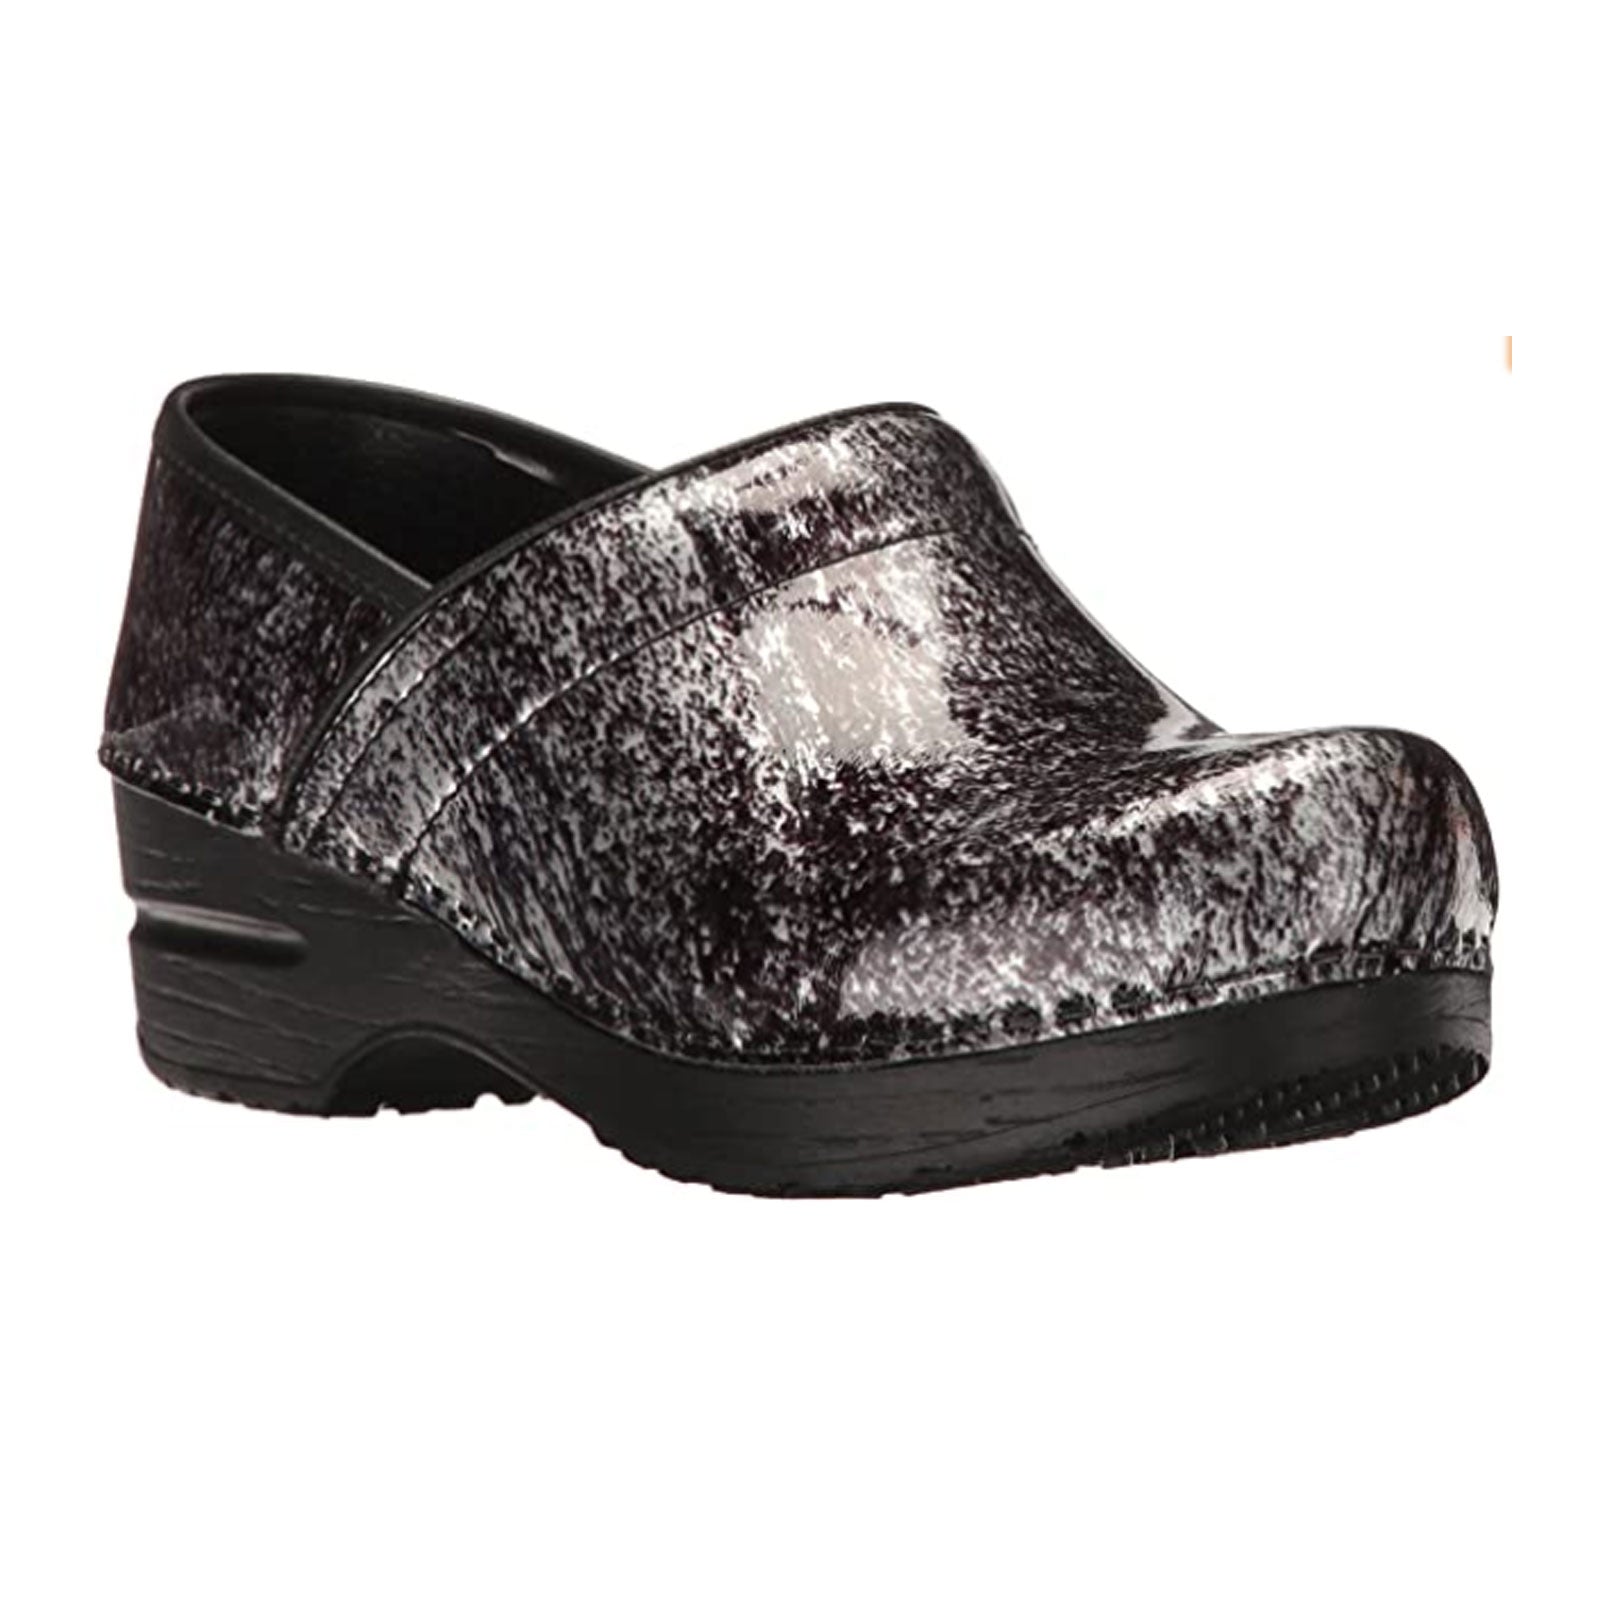 Sanita Professional Pearlized Marble Clog (Women) - Black Dress-Casual - Clogs & Mules - The Heel Shoe Fitters